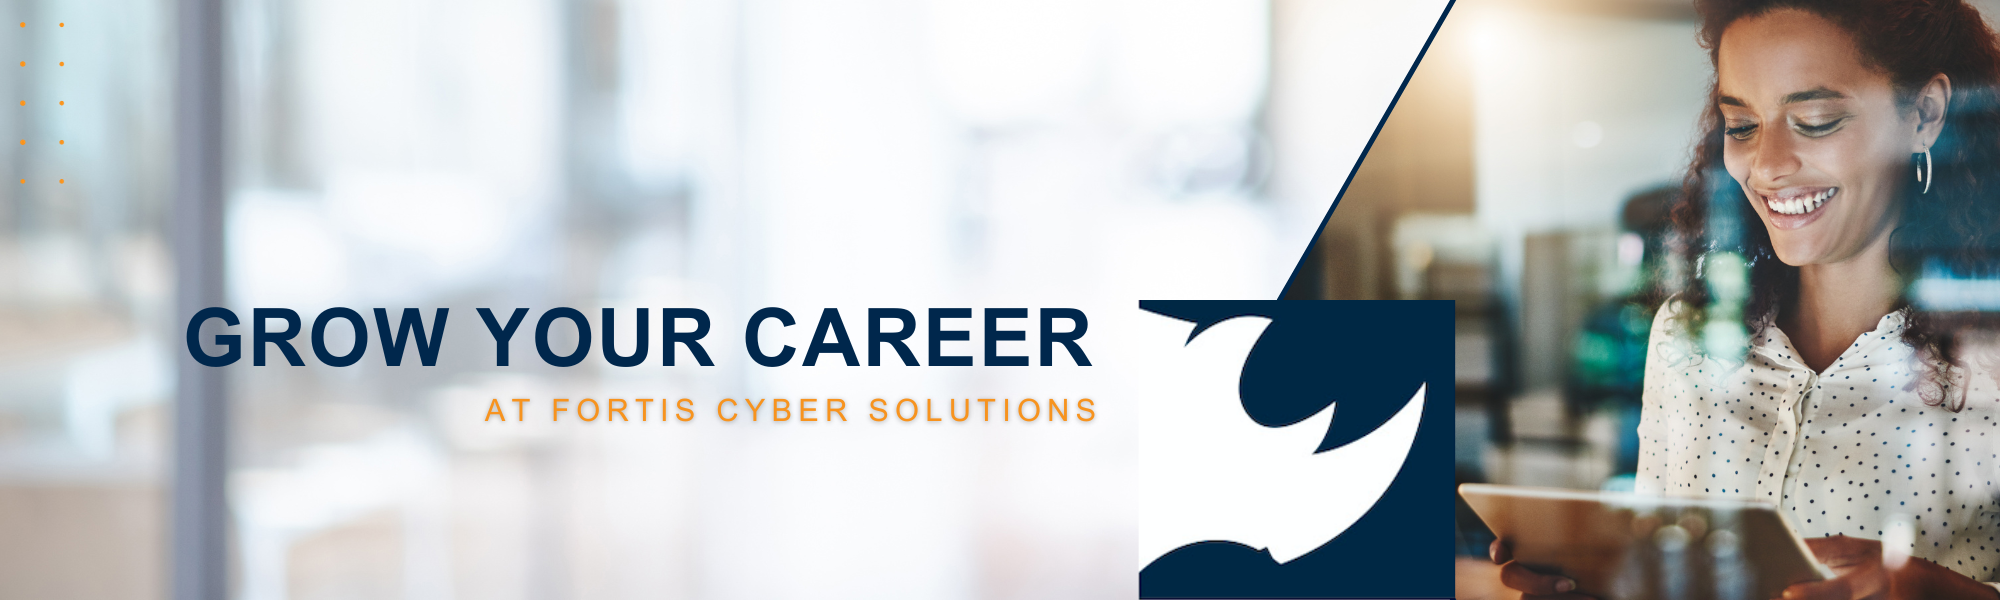 Woman on a computer with the text "Grow Your Career with Fortis CYber Solutions" on the graphic.